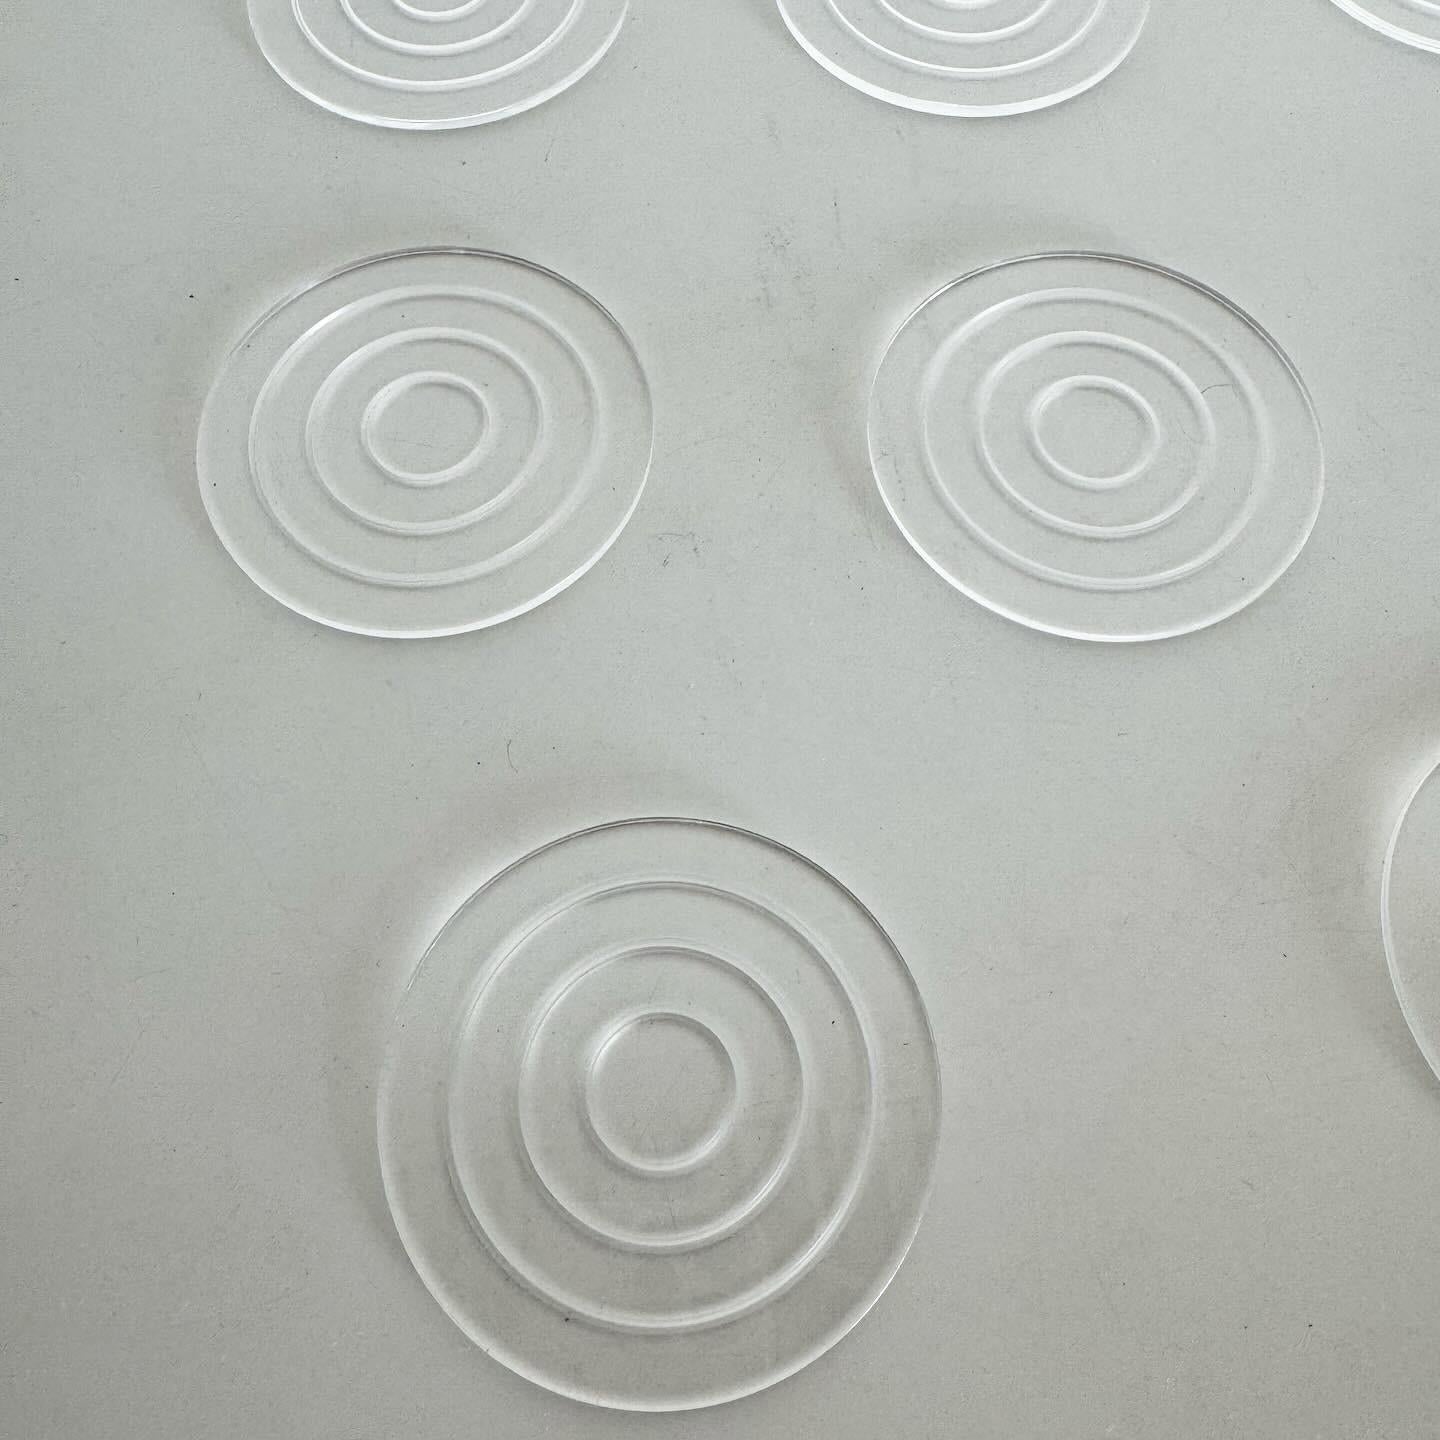 Experience the minimalist elegance of Mid Century Modern with a set of 8 circular Lucite coasters, blending iconic design with functionality. These coasters are not just a practical accessory but also a statement piece that reflects the innovative